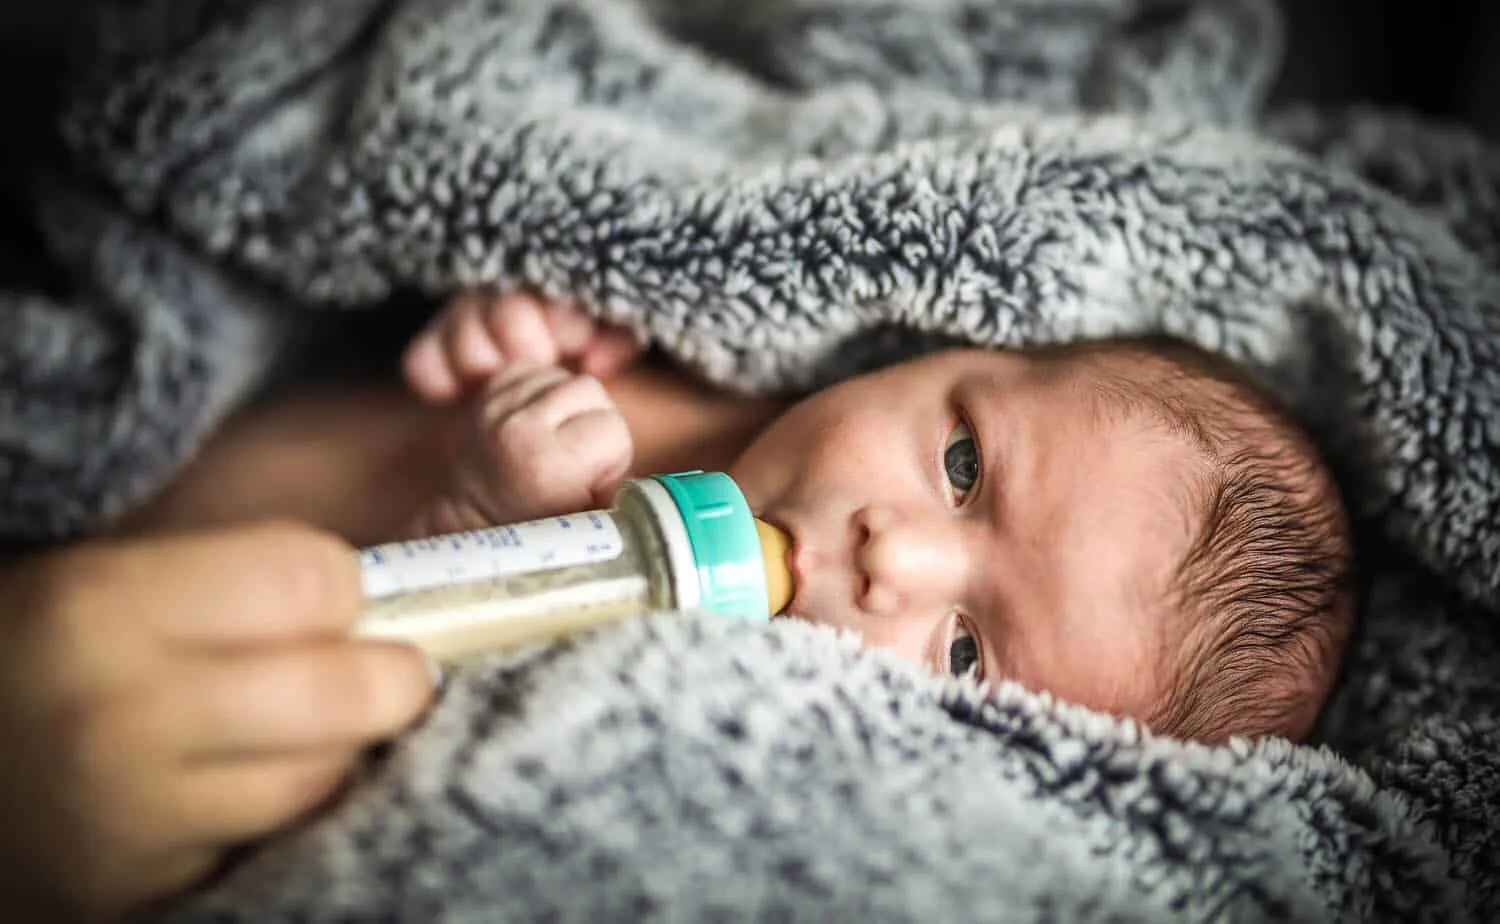 Pumping breastmilk is a skill and takes a little time to master. It can be difficult if you're not quite sure what you're doing or if you haven't had the right support. Here's some tips for how you can make pumping breastmilk easier (and more effective).